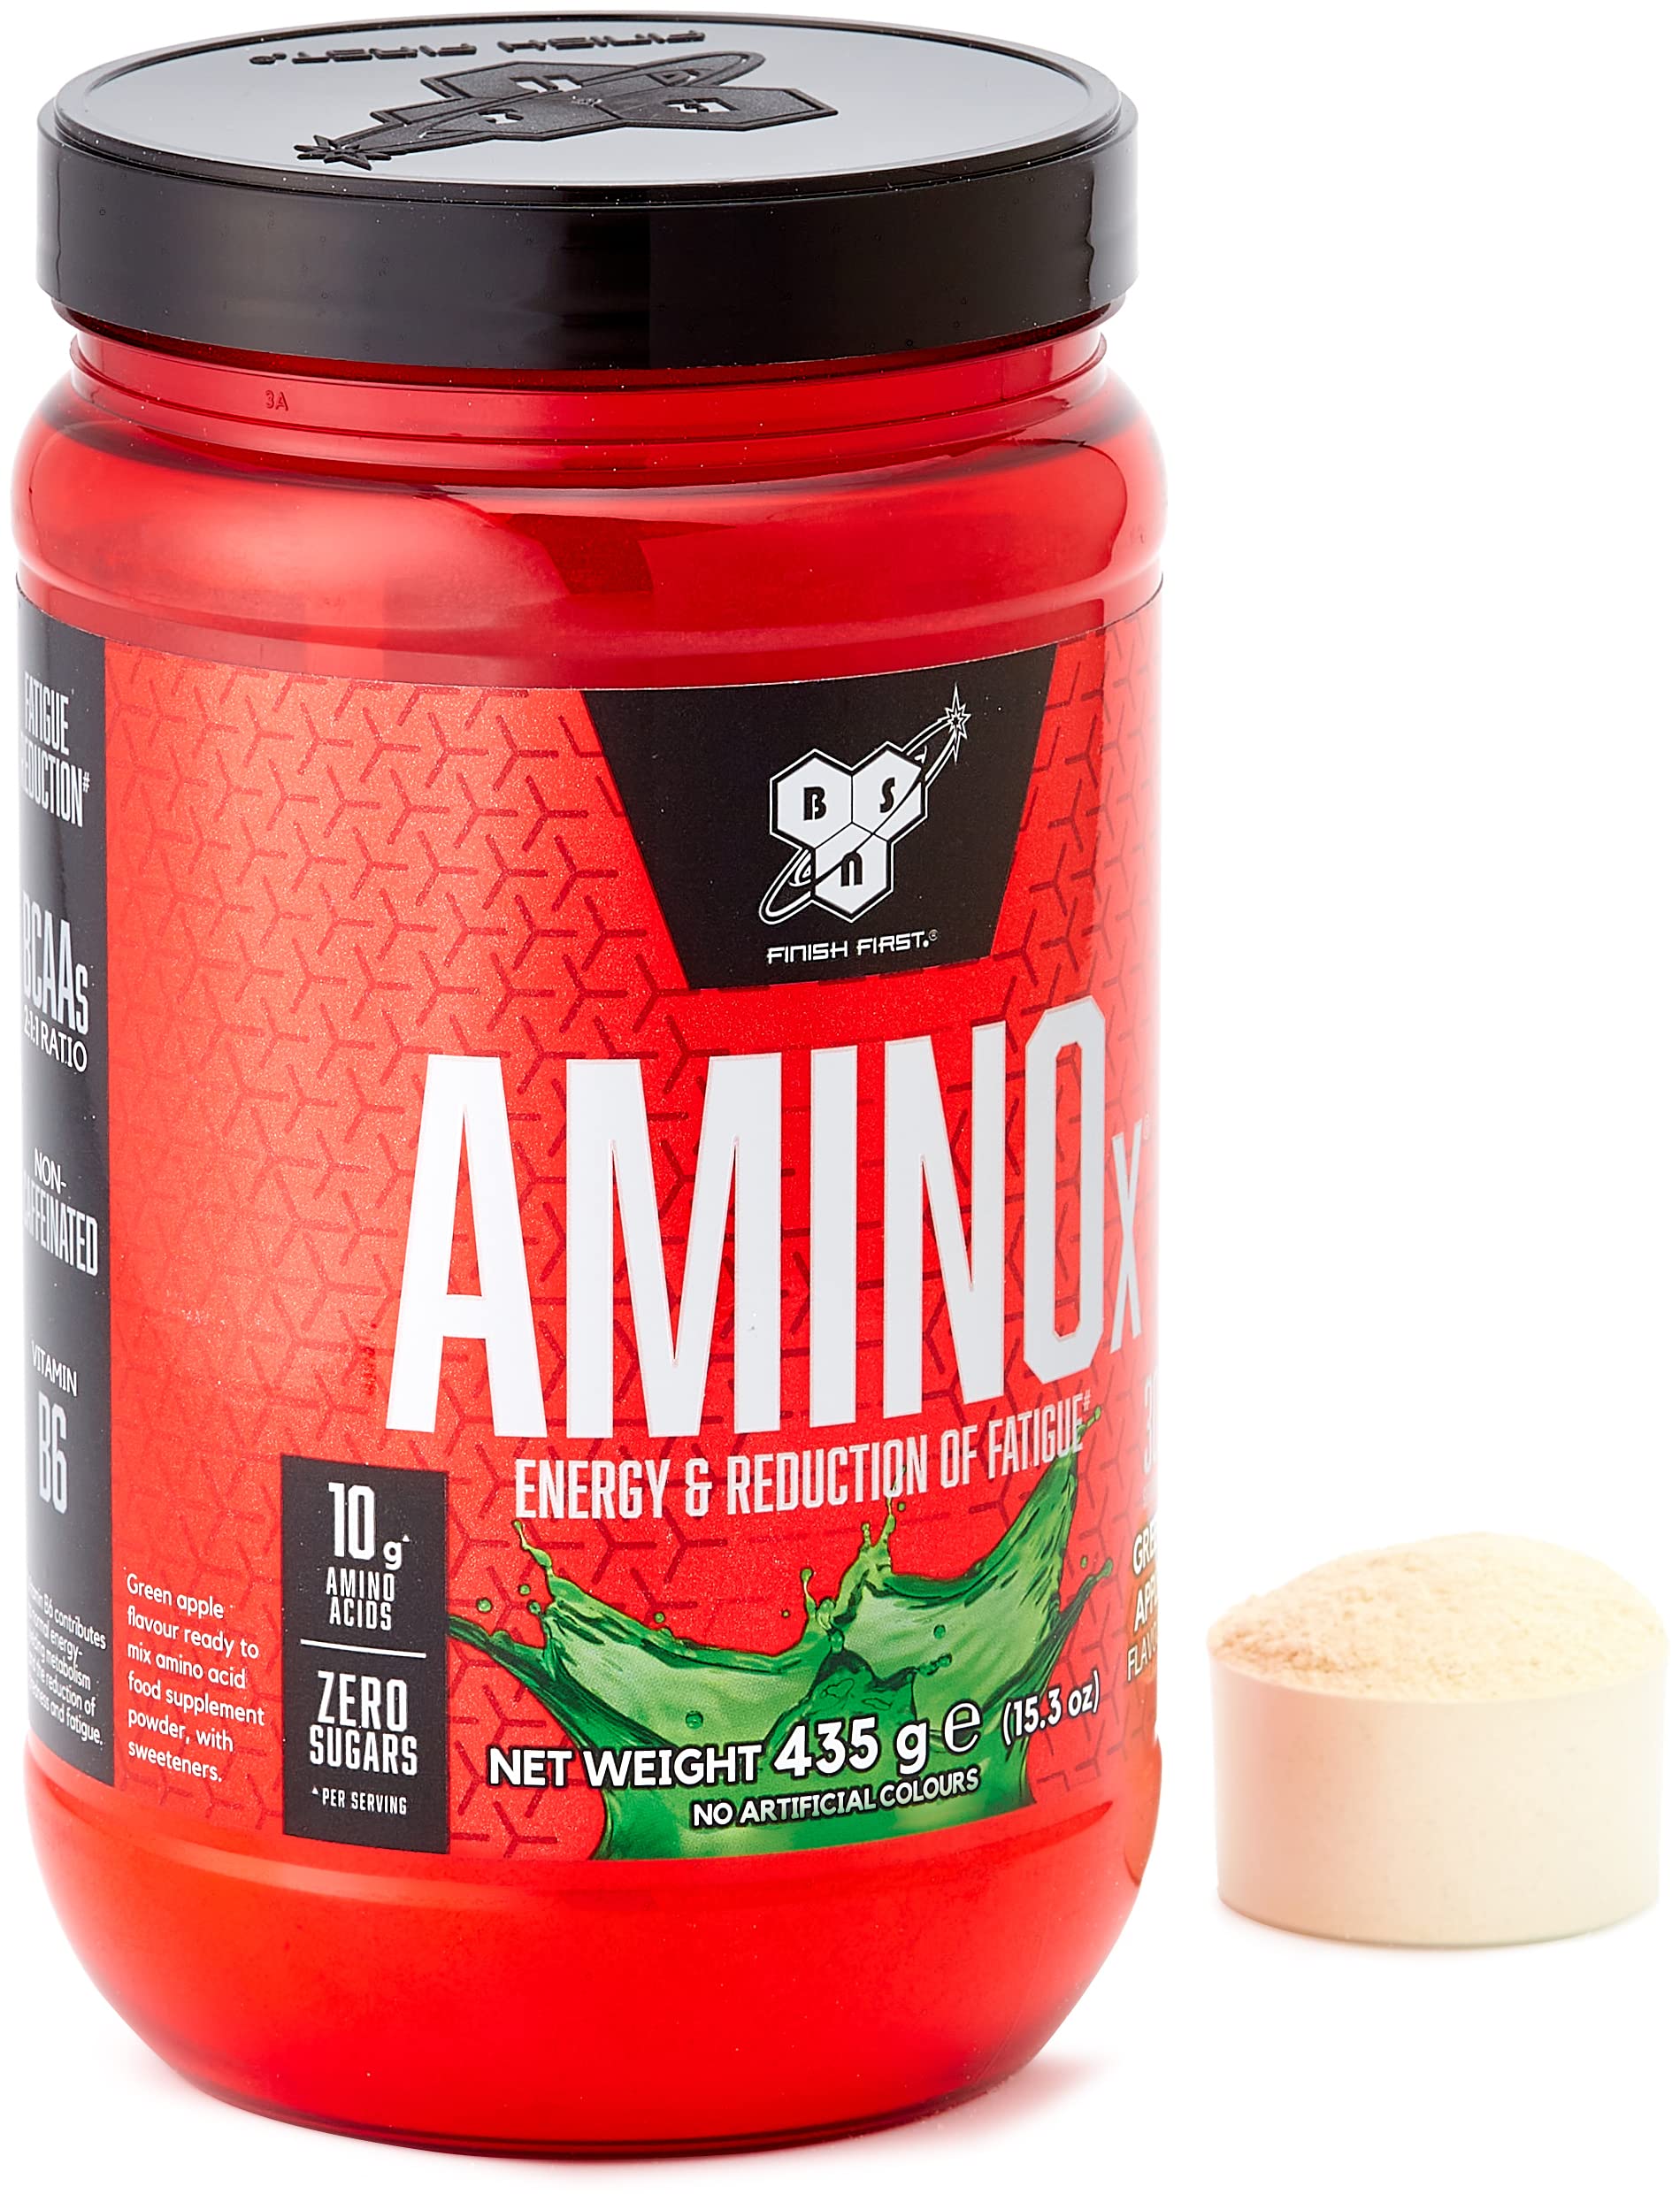 Book Cover BSN Amino X Muscle Recovery & Endurance Powder with BCAAs, 10 Grams of Amino Acids, Keto Friendly, Caffeine Free, Flavor: Green Apple, 30 servings (Packaging may vary) Green Apple 30.0 Servings (Pack of 1)